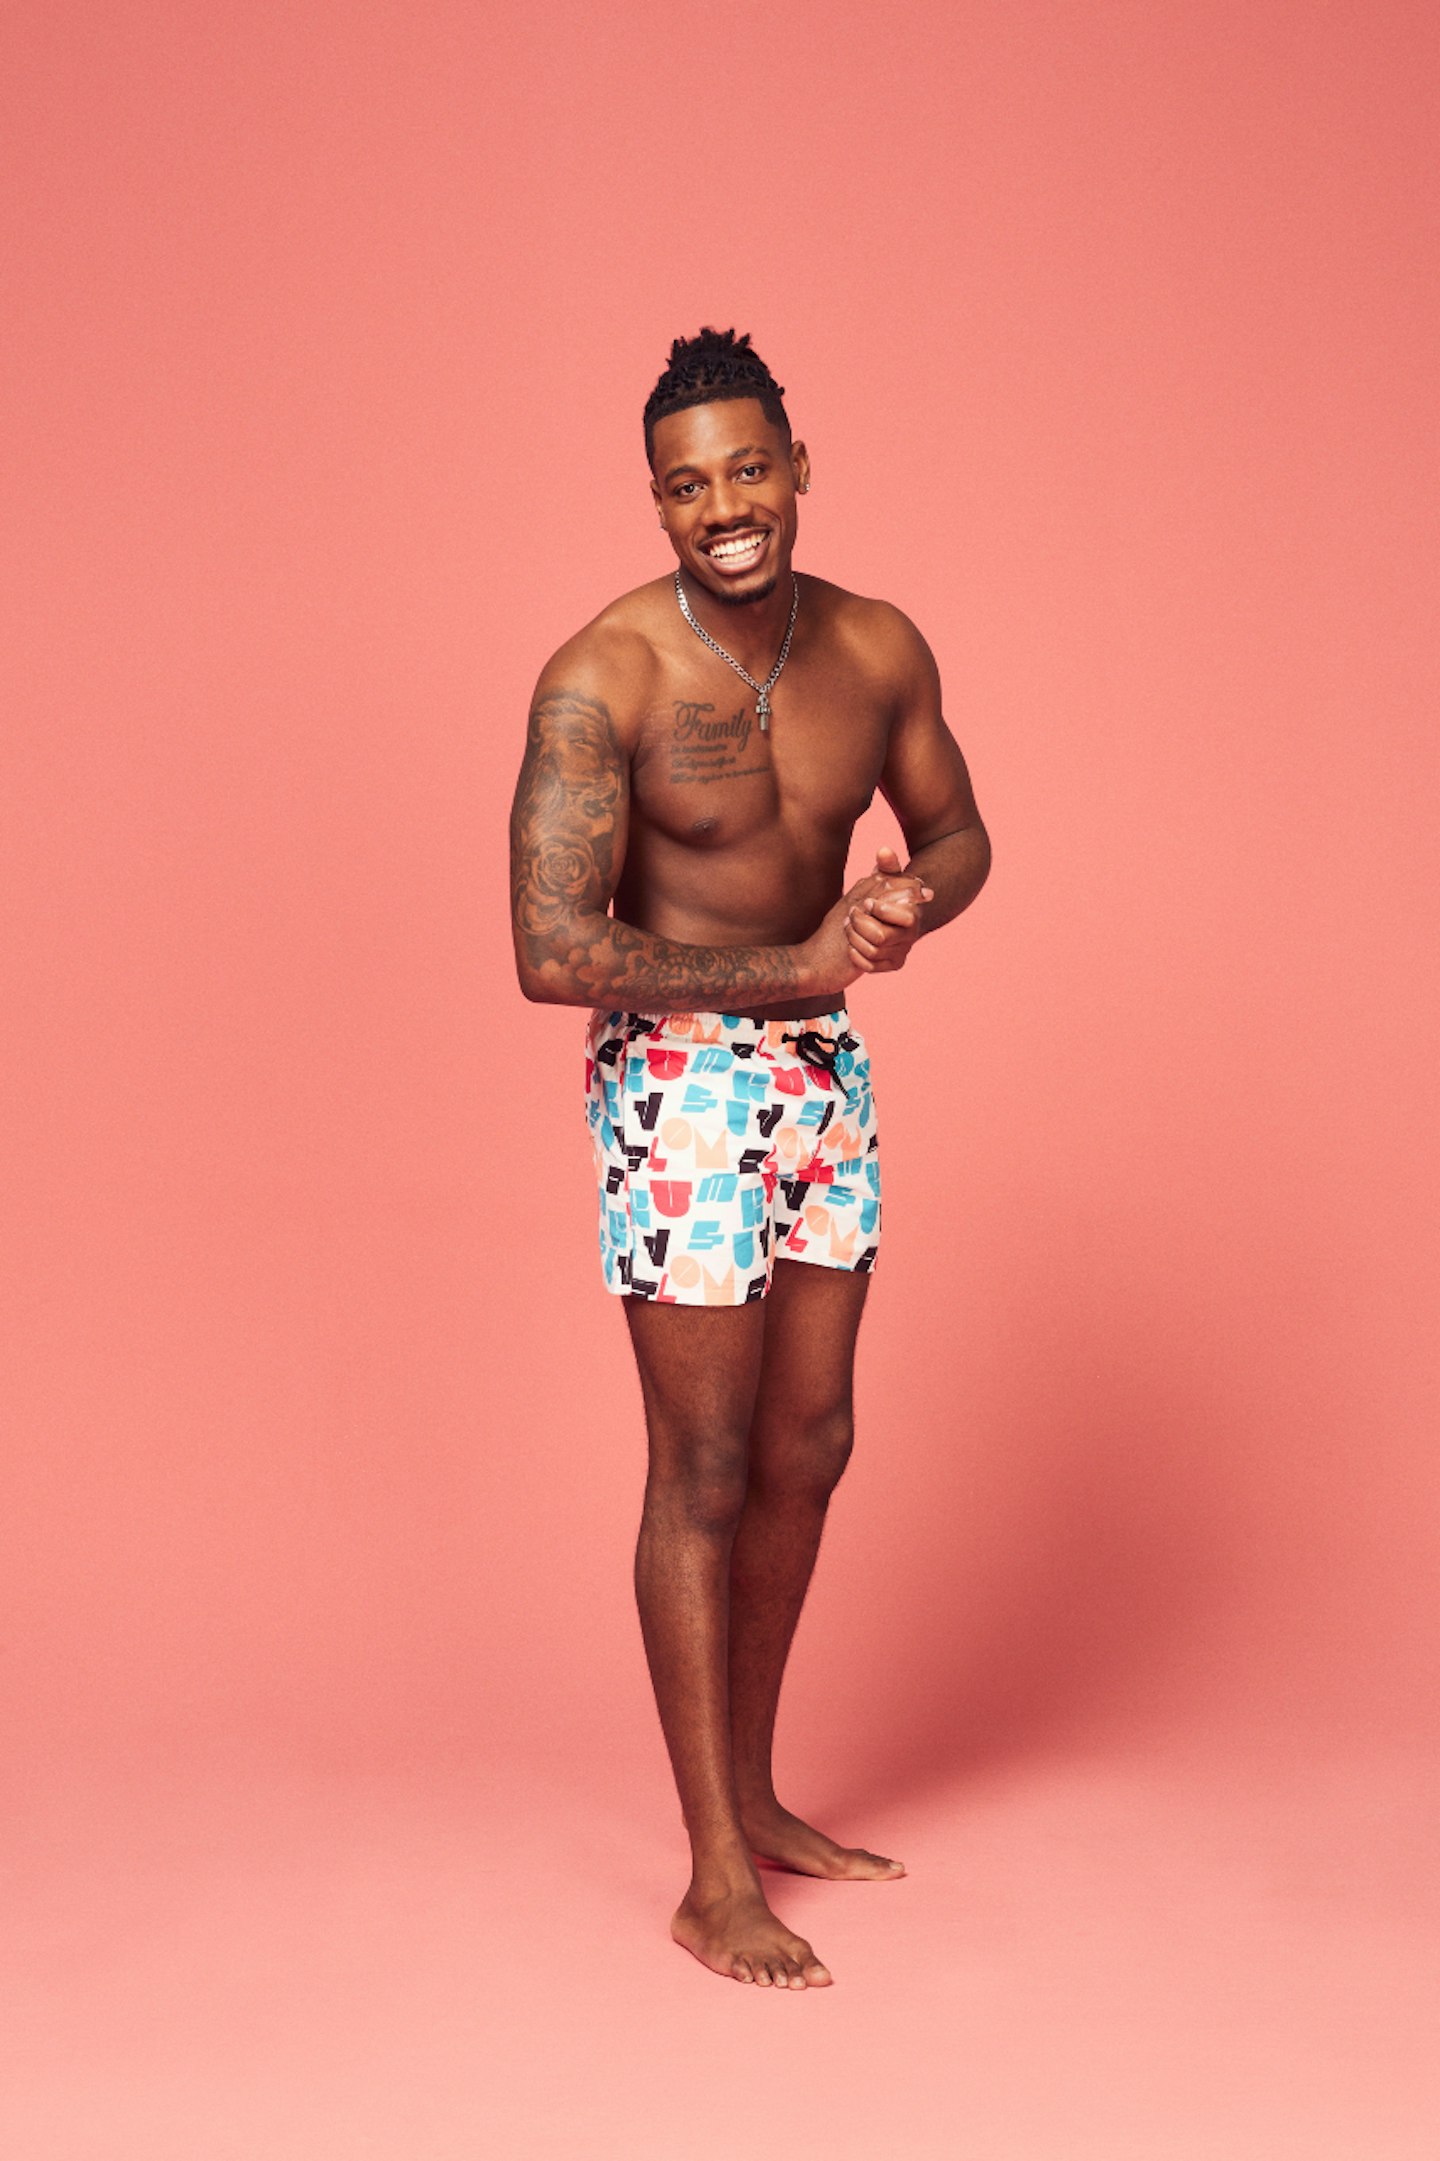 Love Island's Shaq Muhammad posing in front of a pink background